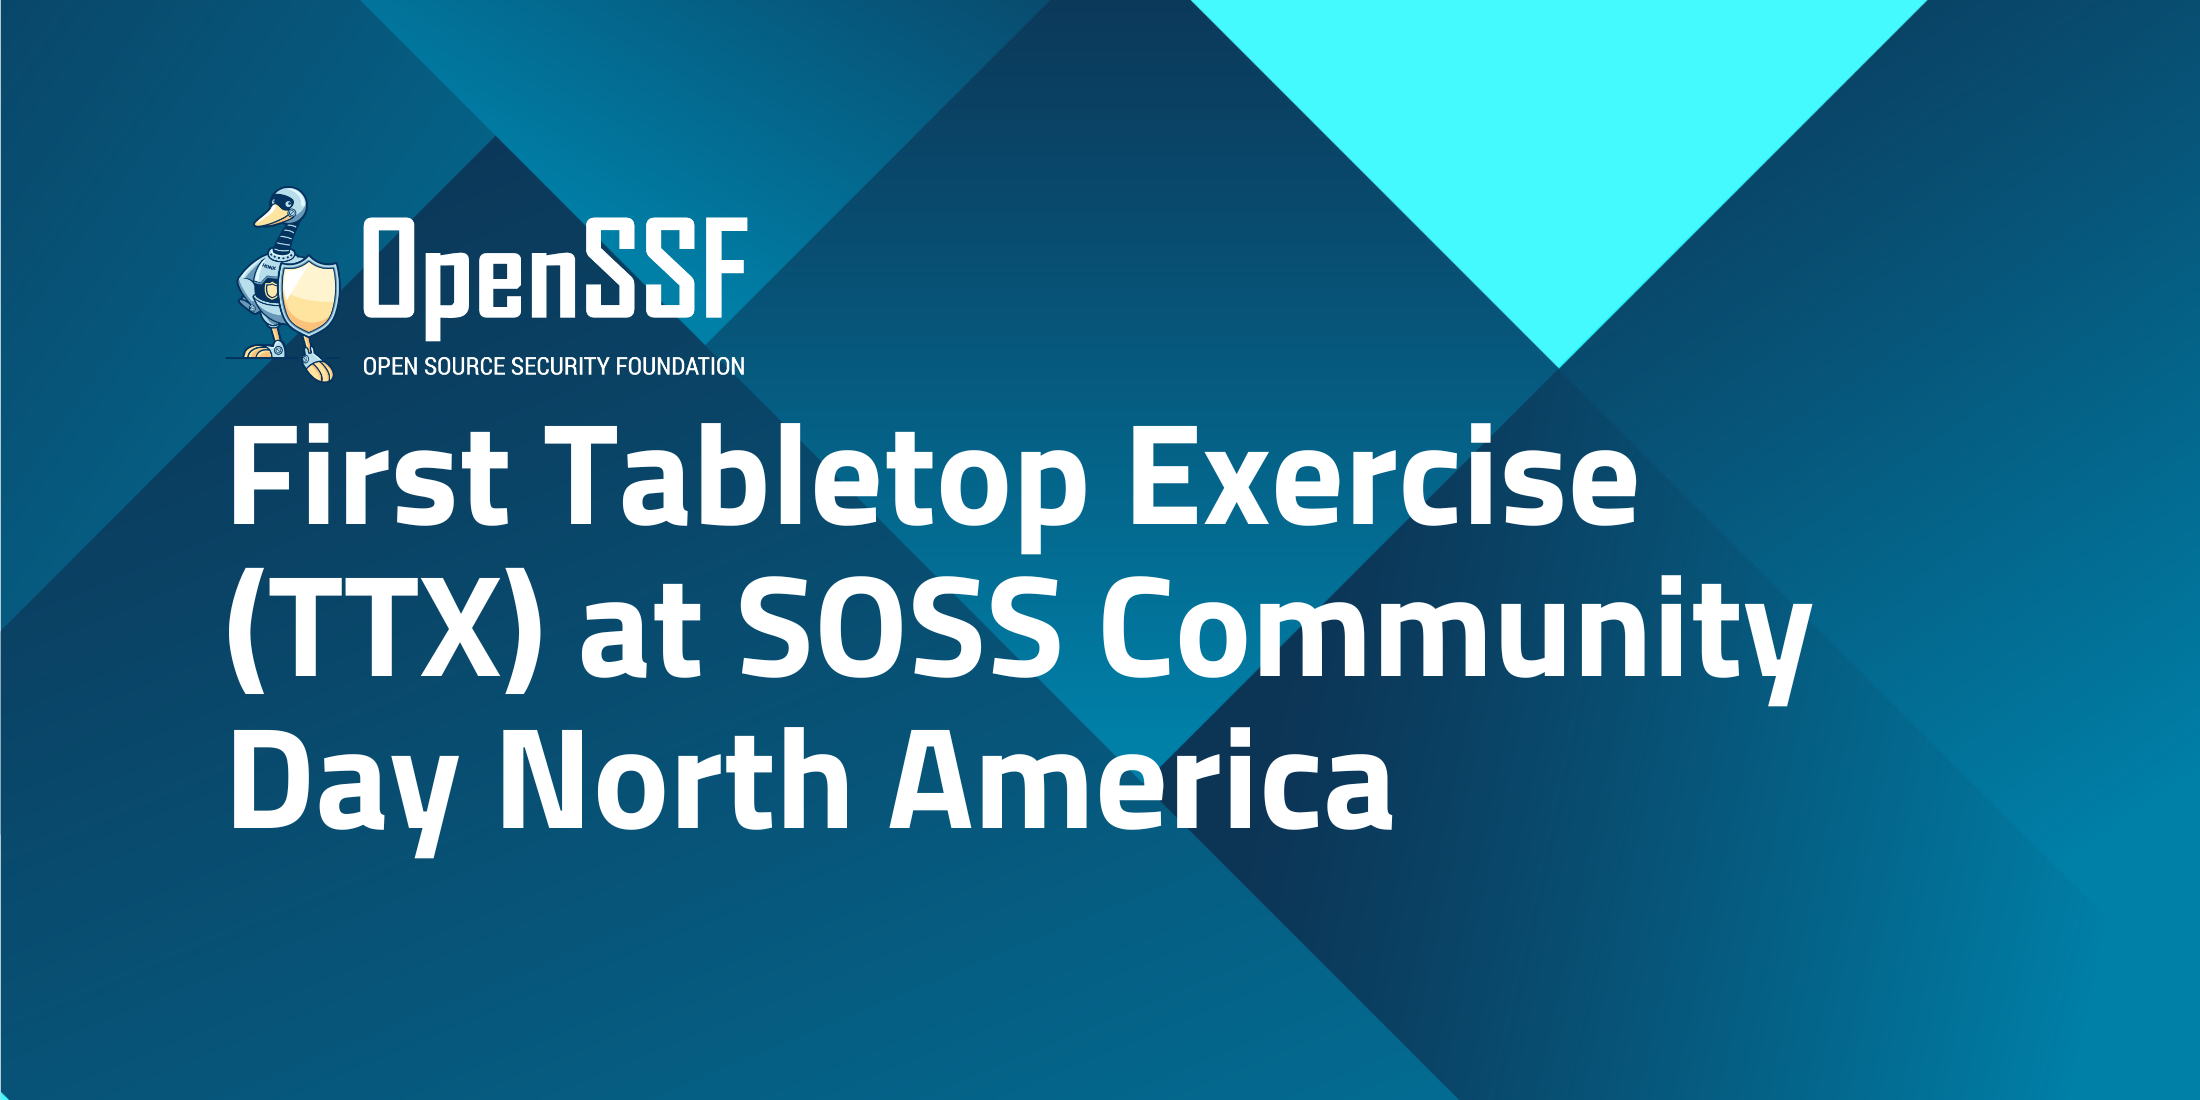 First Tabletop Exercise (TTX) at SOSS Community Day North America